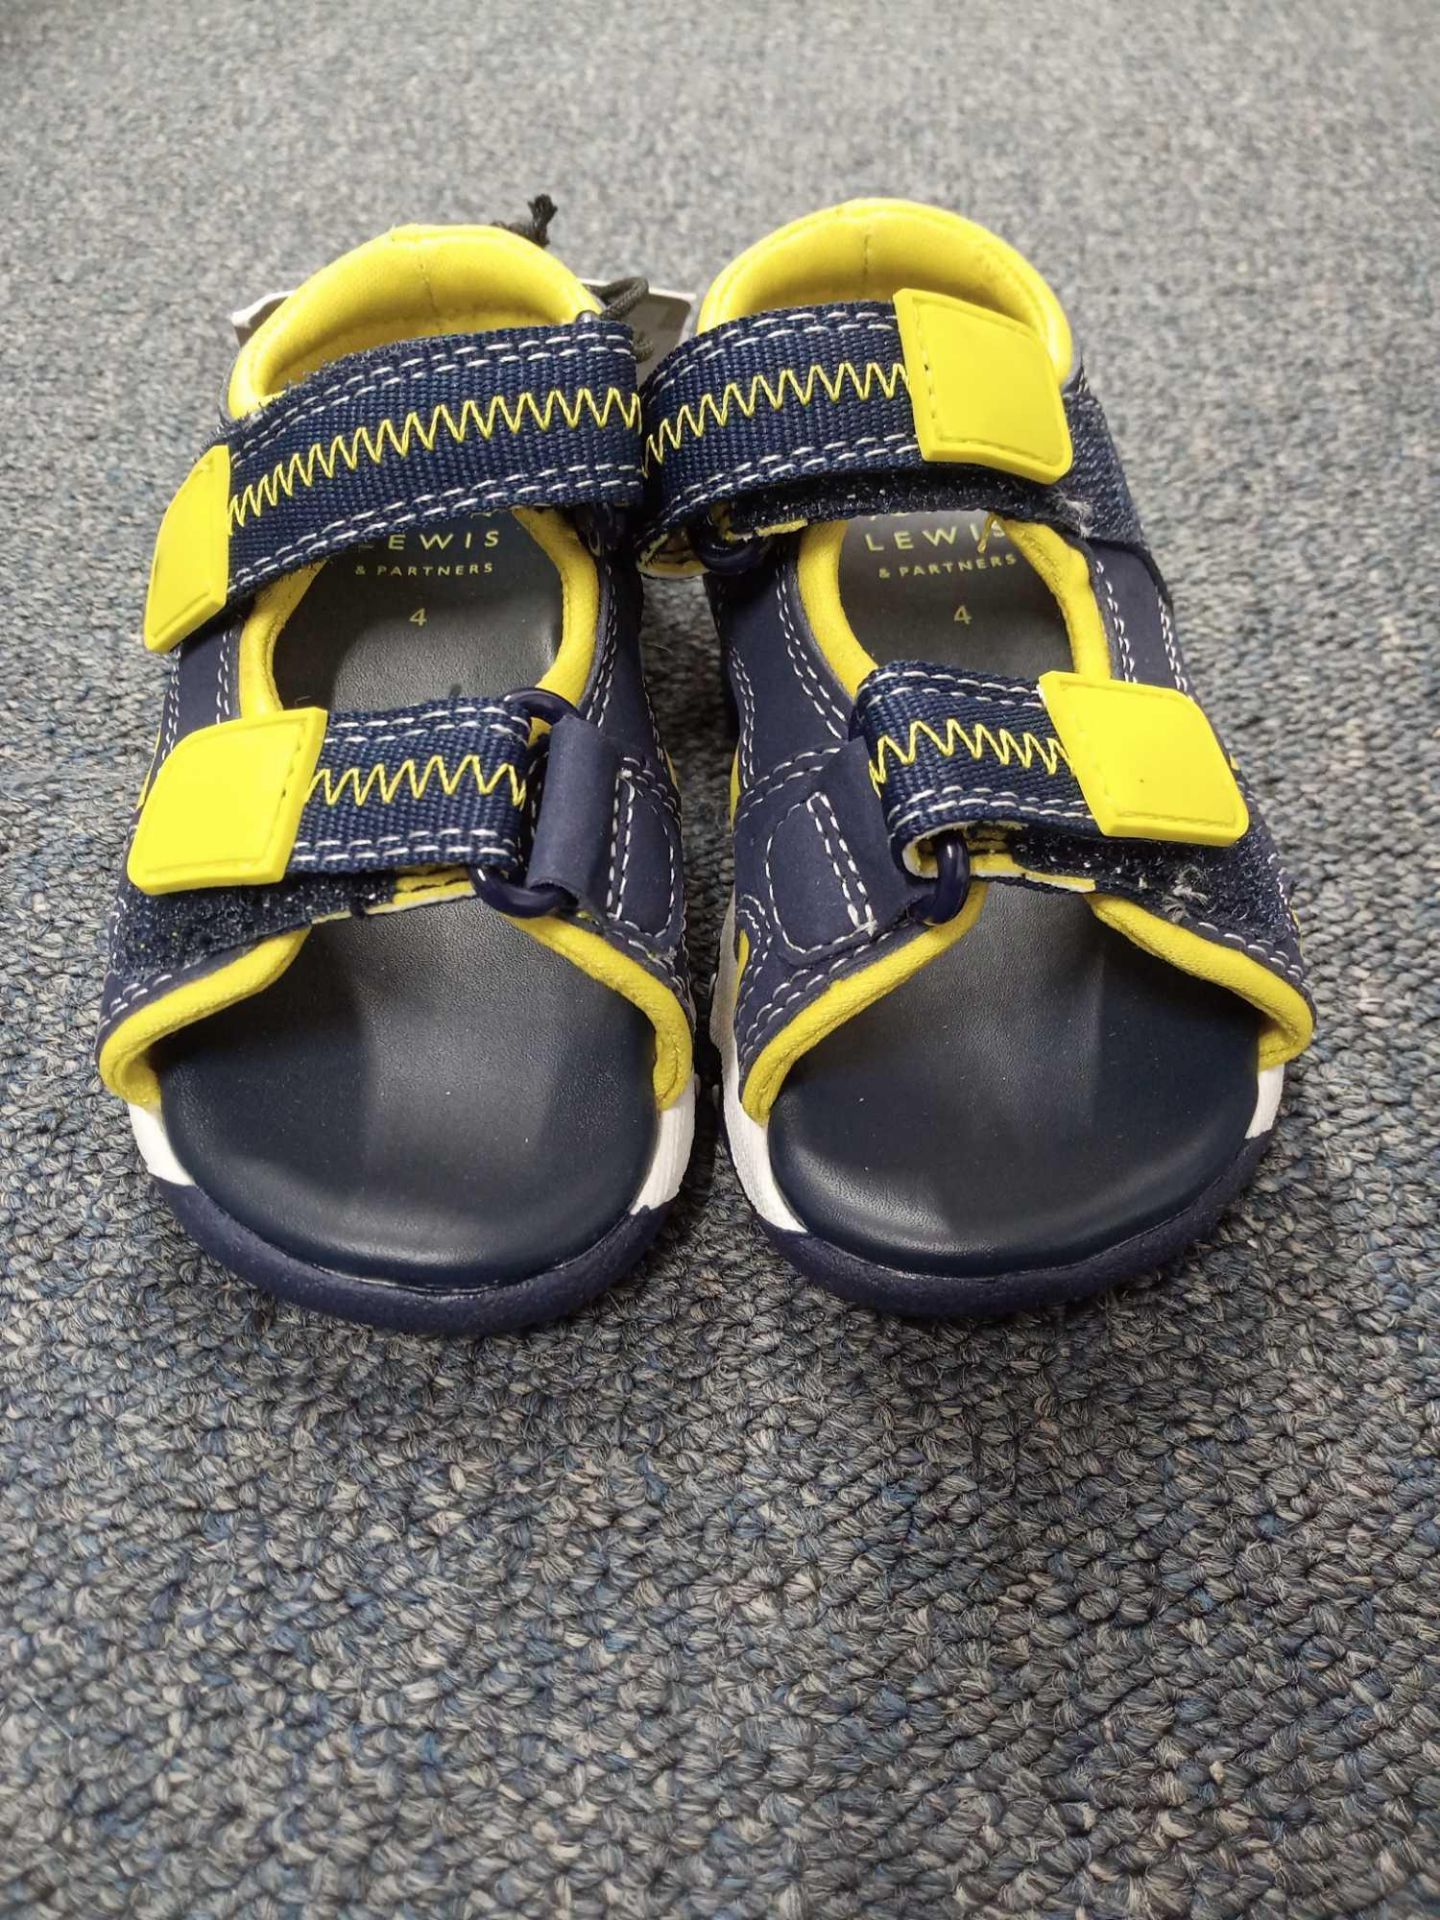 Boys John Lewis Sandals Size 4 Blue & Yellow (1493378)(Appraisals Available Upon Request) (Pictures